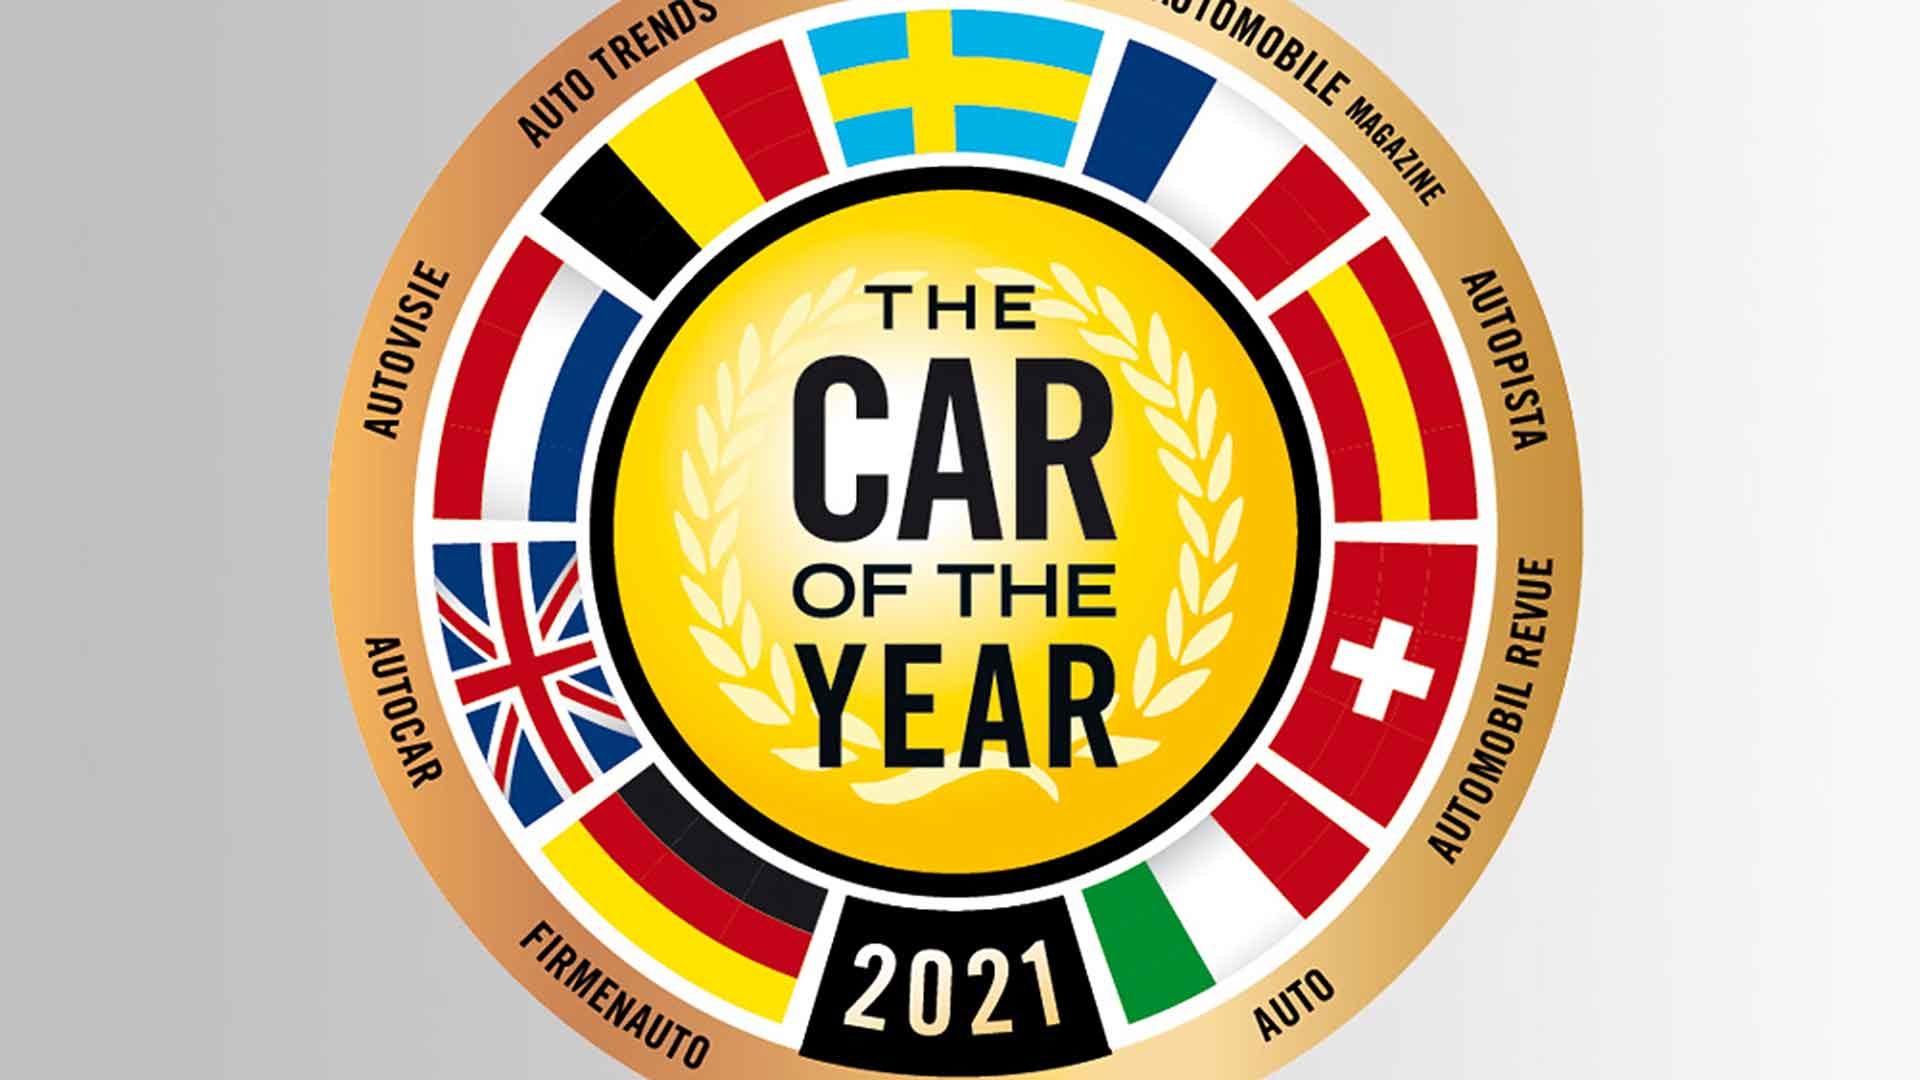 Car of the Year 2021 logo